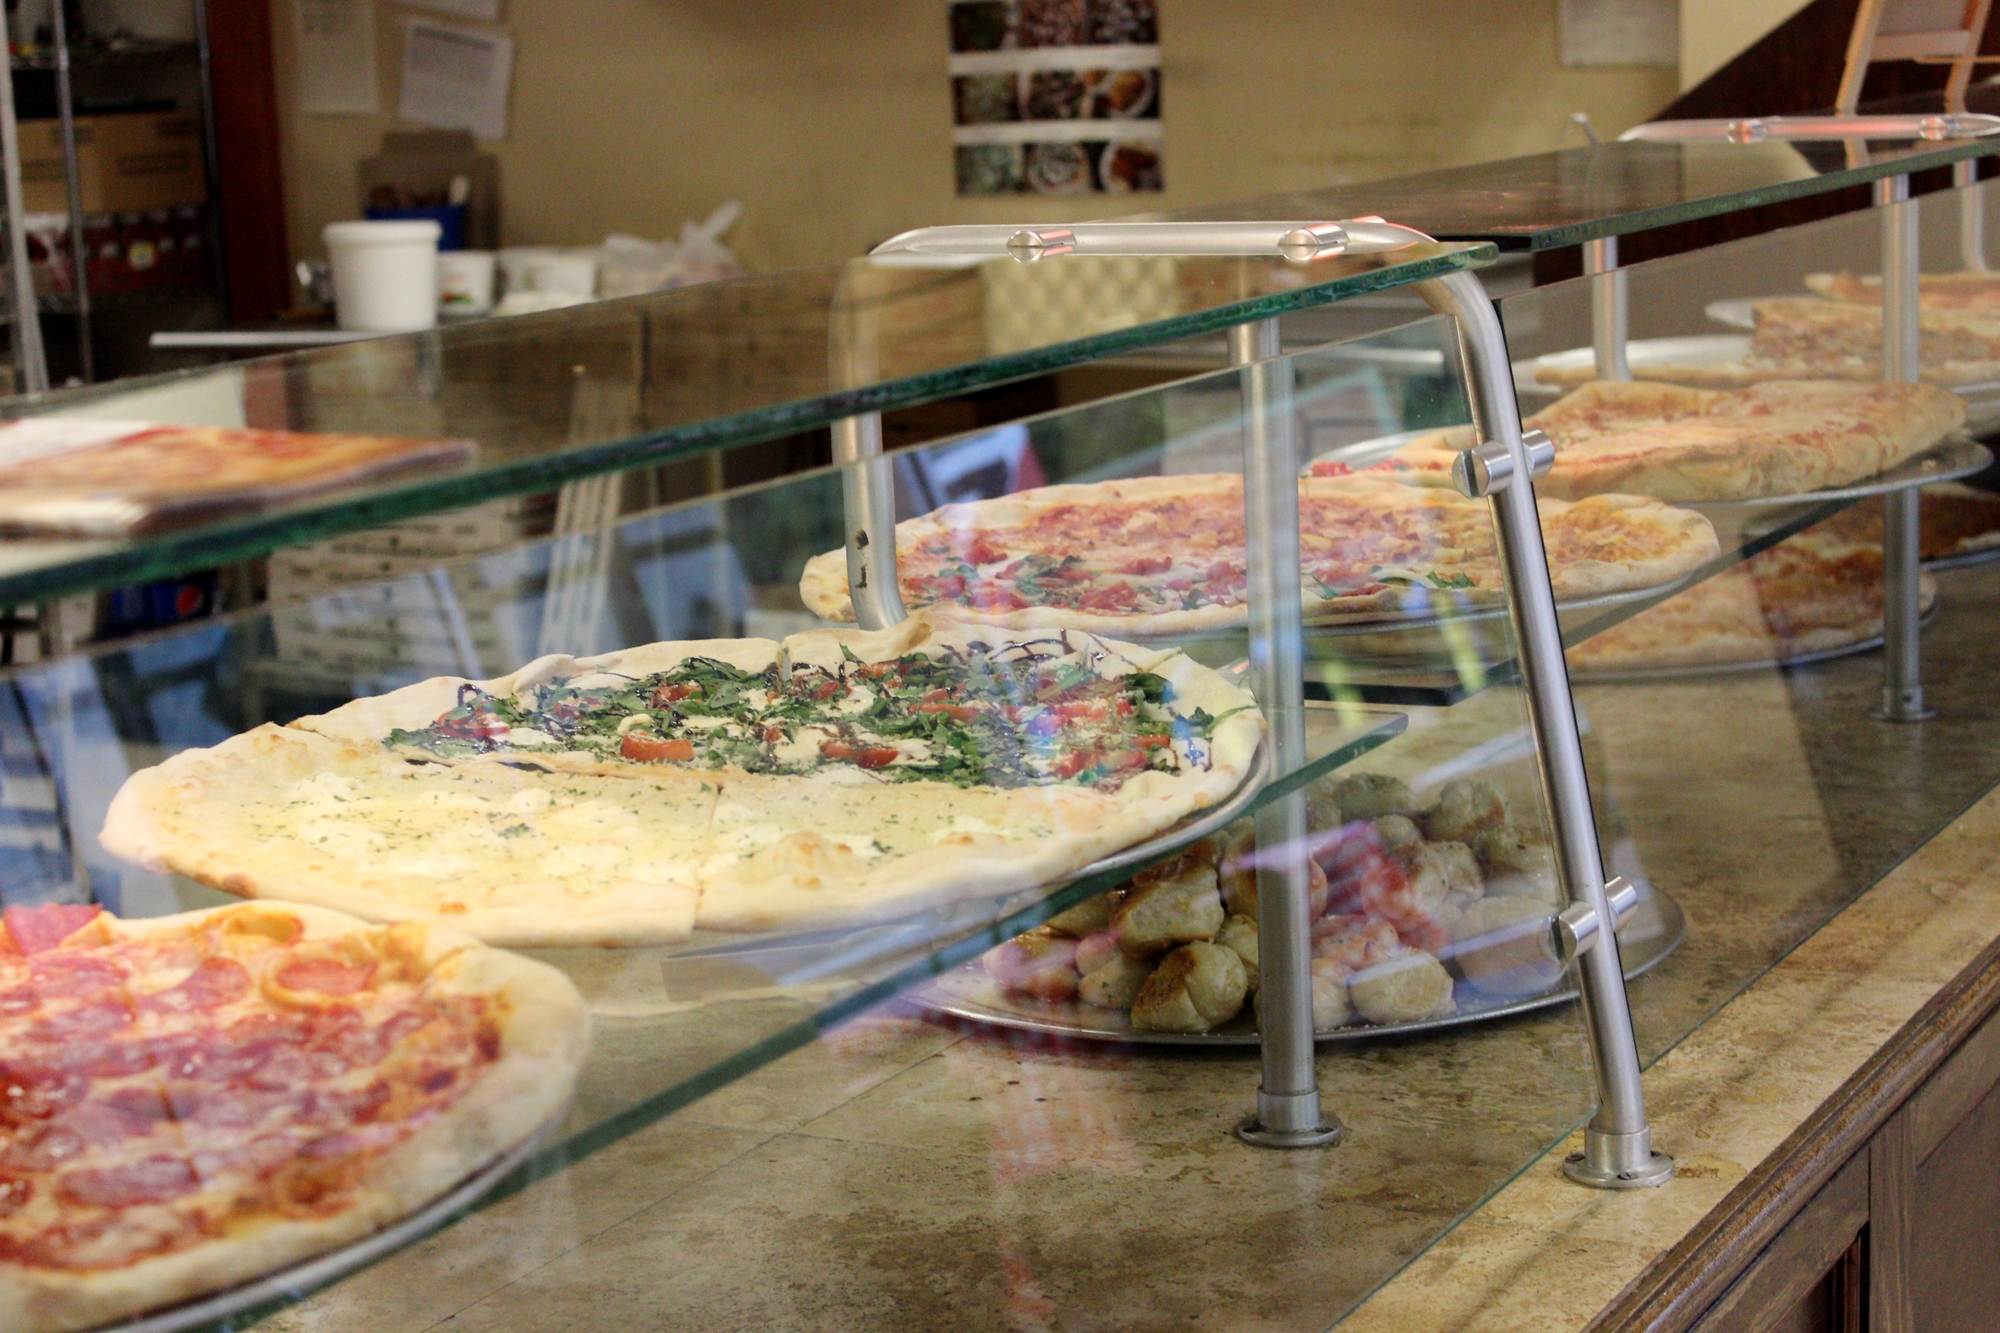 Tony's Pizza has become one of the community's favorite pizza restaurants.